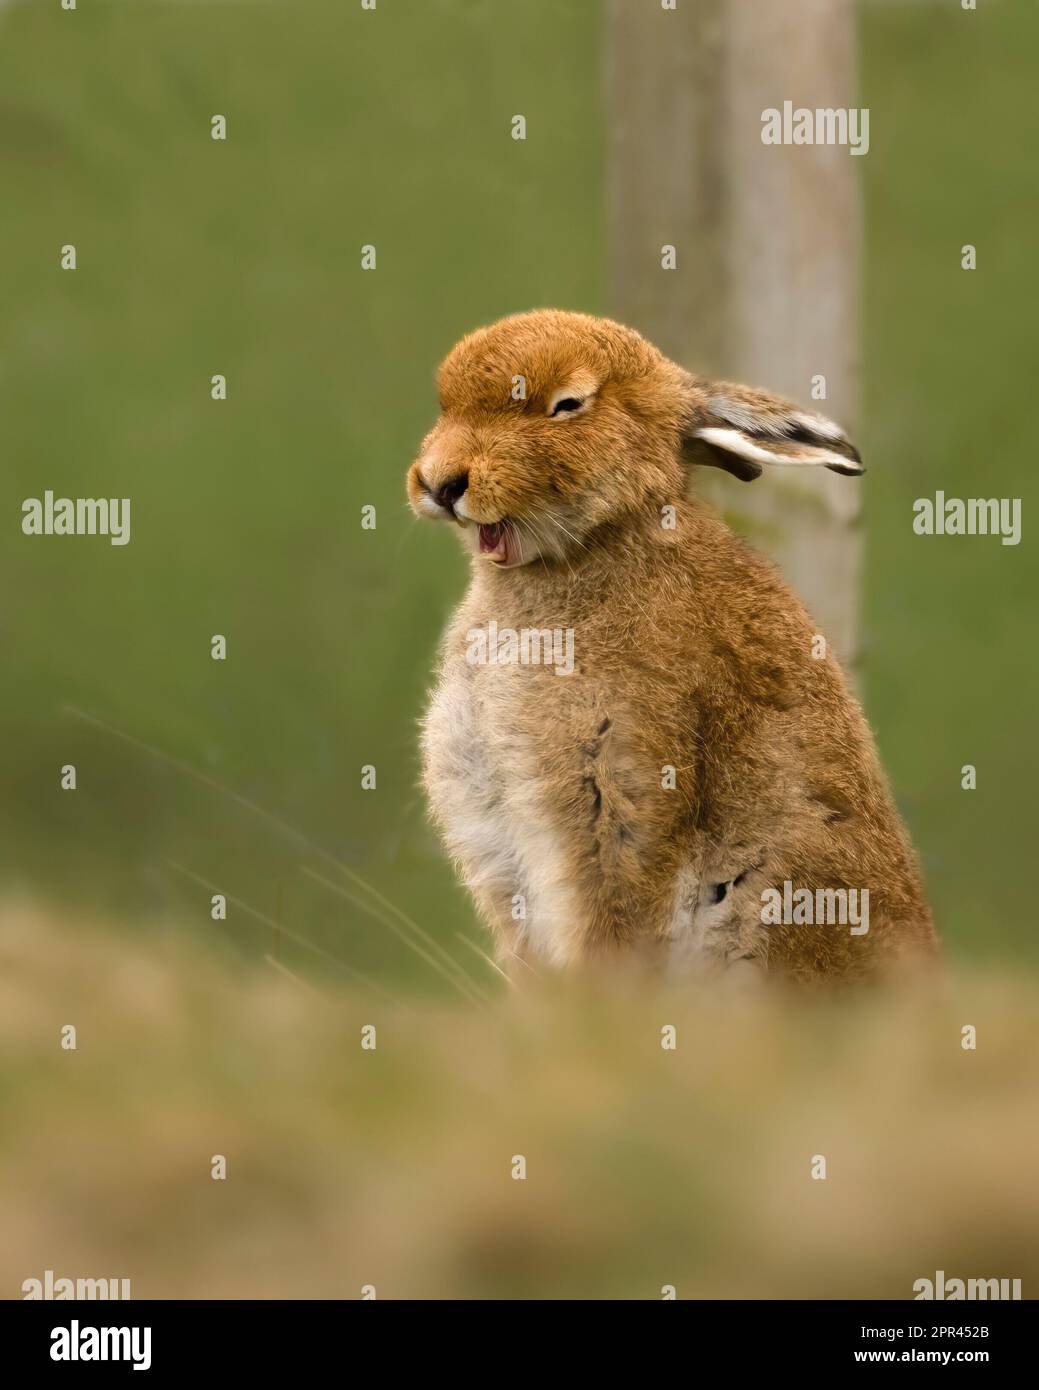 HILARIOUS images of naughty hares pulling faces the funniest of faces have been captured in Dorset. Stock Photo